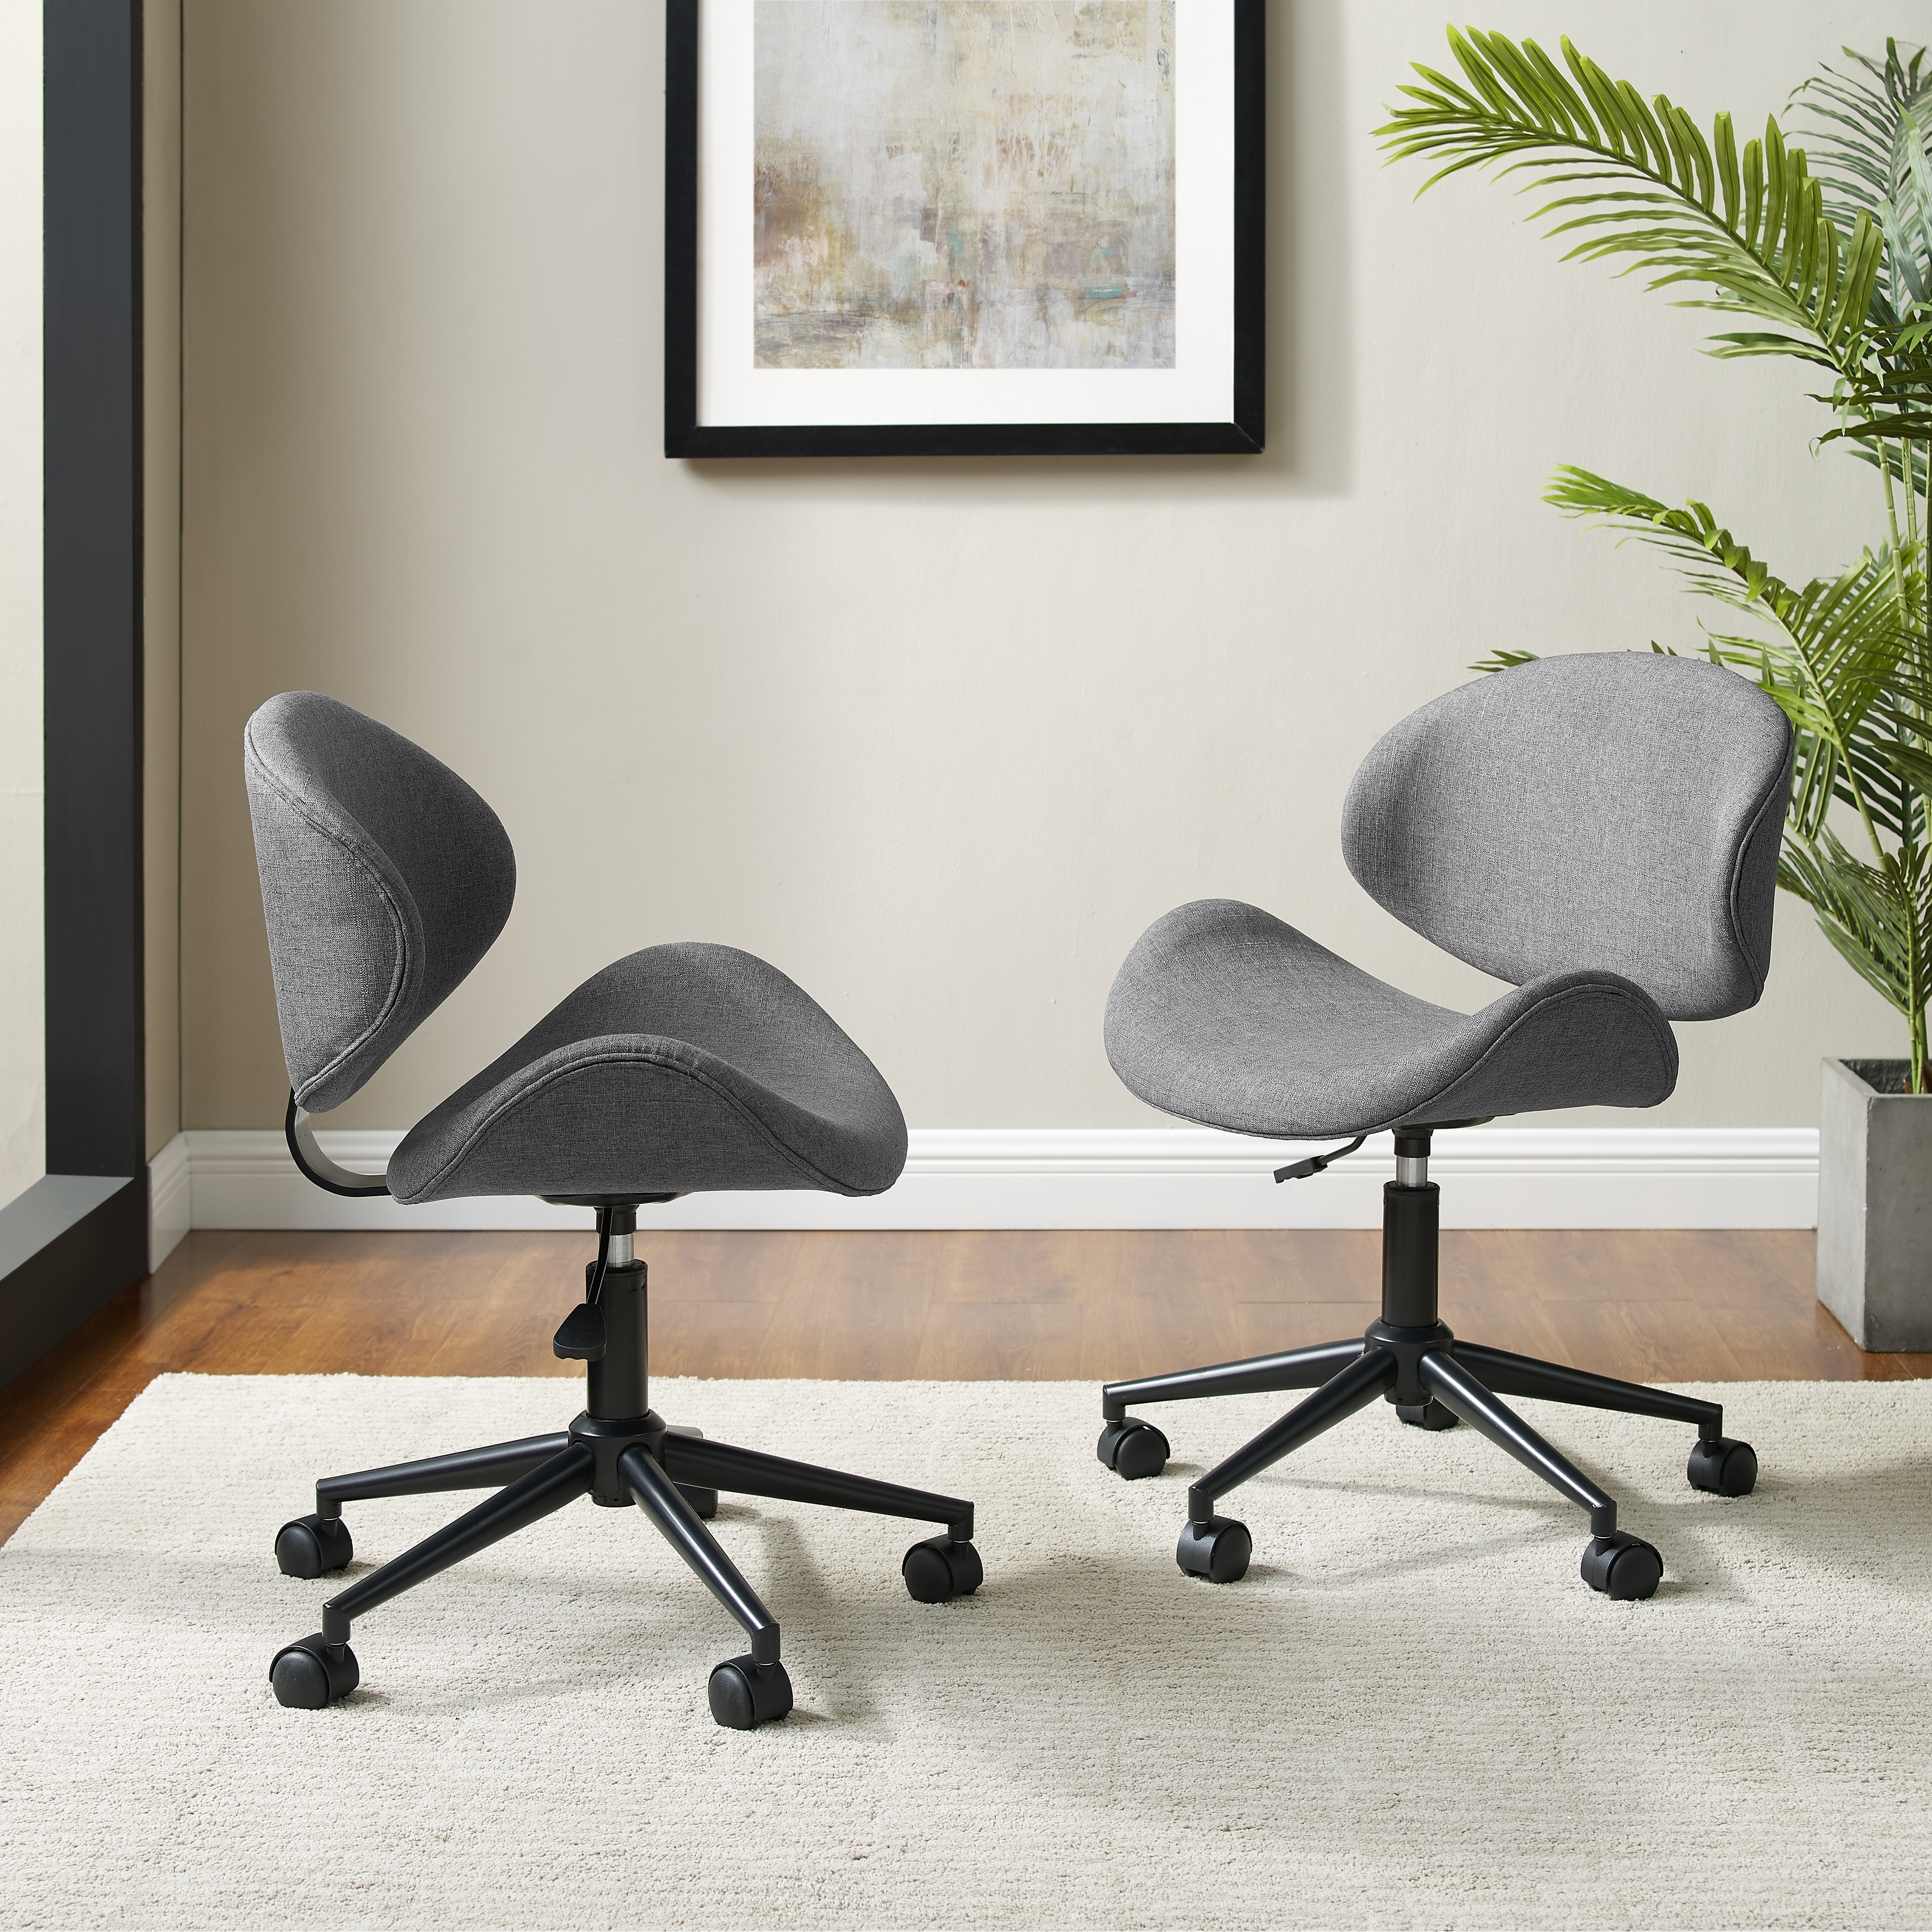 https://ak1.ostkcdn.com/images/products/is/images/direct/55e1deb84404b7ae21d27f25a5db71ba326c440a/Madonna-Mid-century-Adjustable-Office-Chair-by-Corvus.jpg